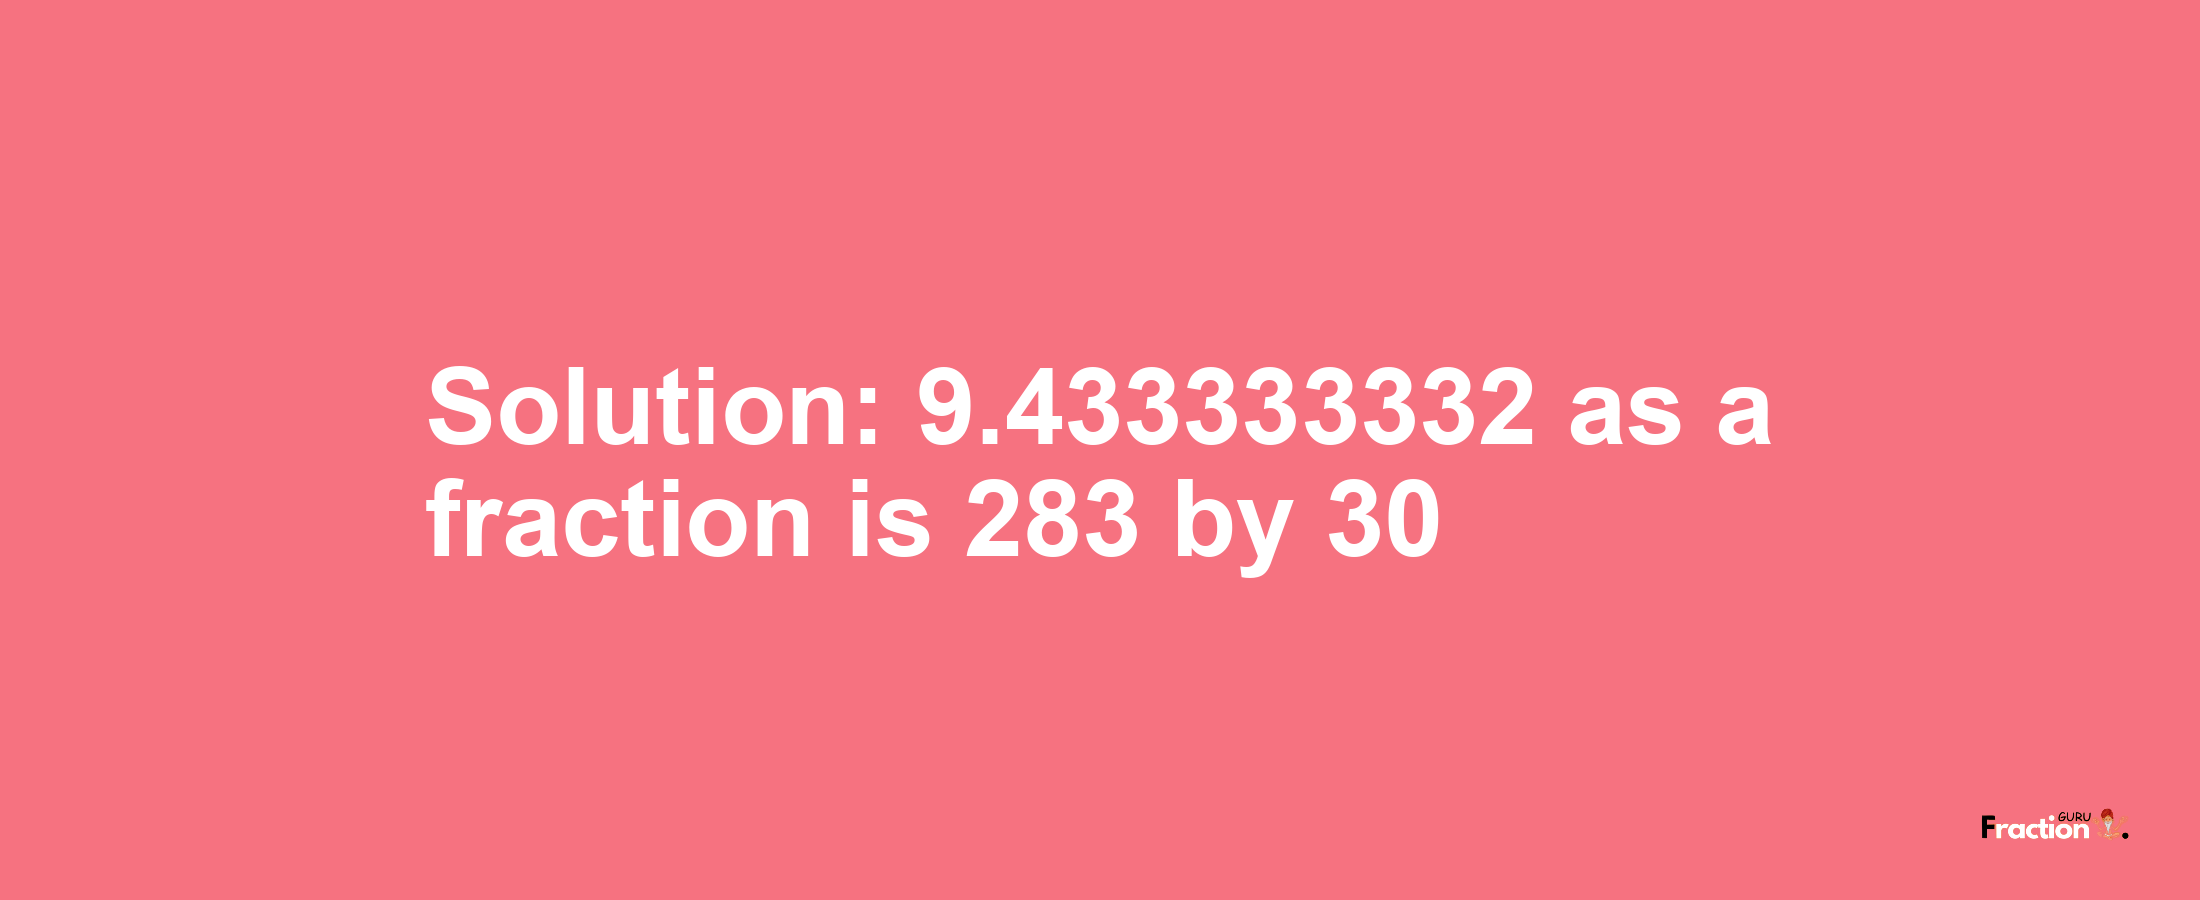 Solution:9.433333332 as a fraction is 283/30